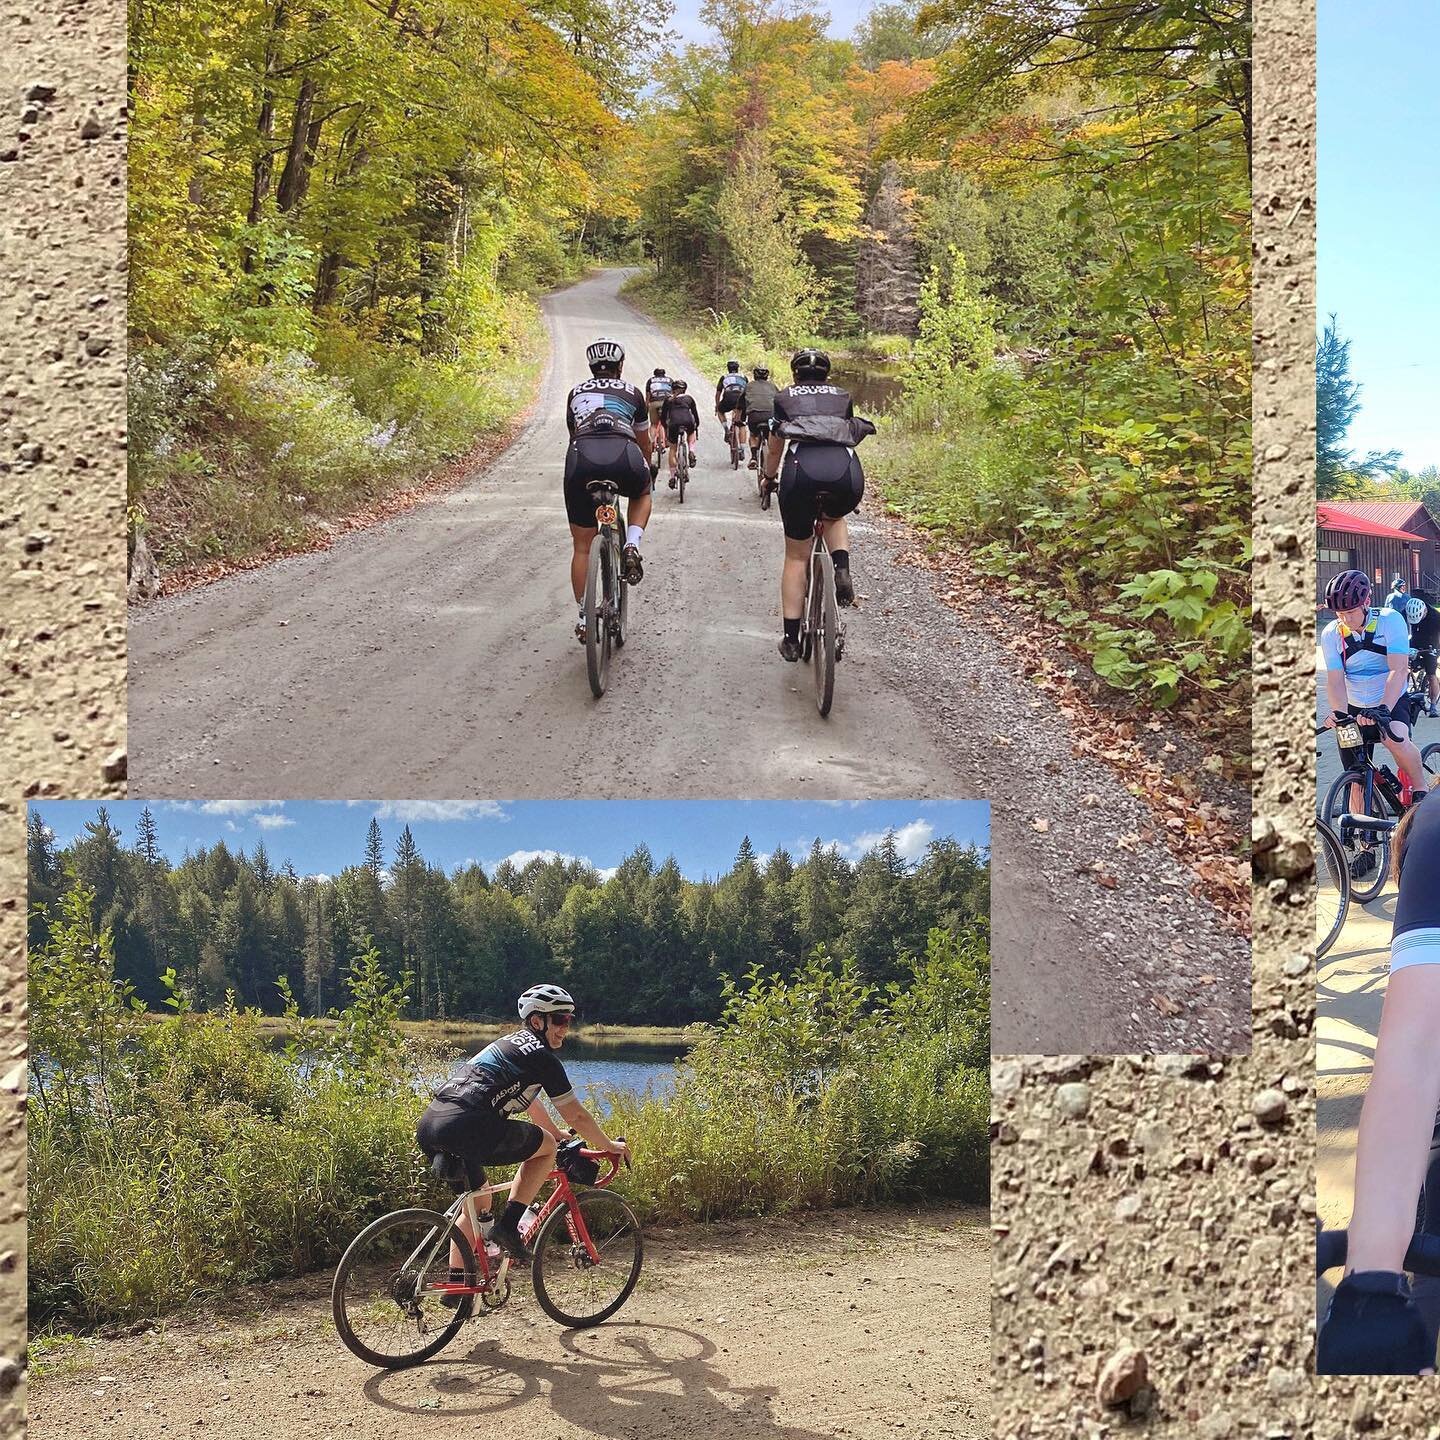 Chillin' in Haliburton! We had a great crew take on the classic 8 hour gravel relay race this past weekend, a nice summer send-off before cyclocross season gets underway.